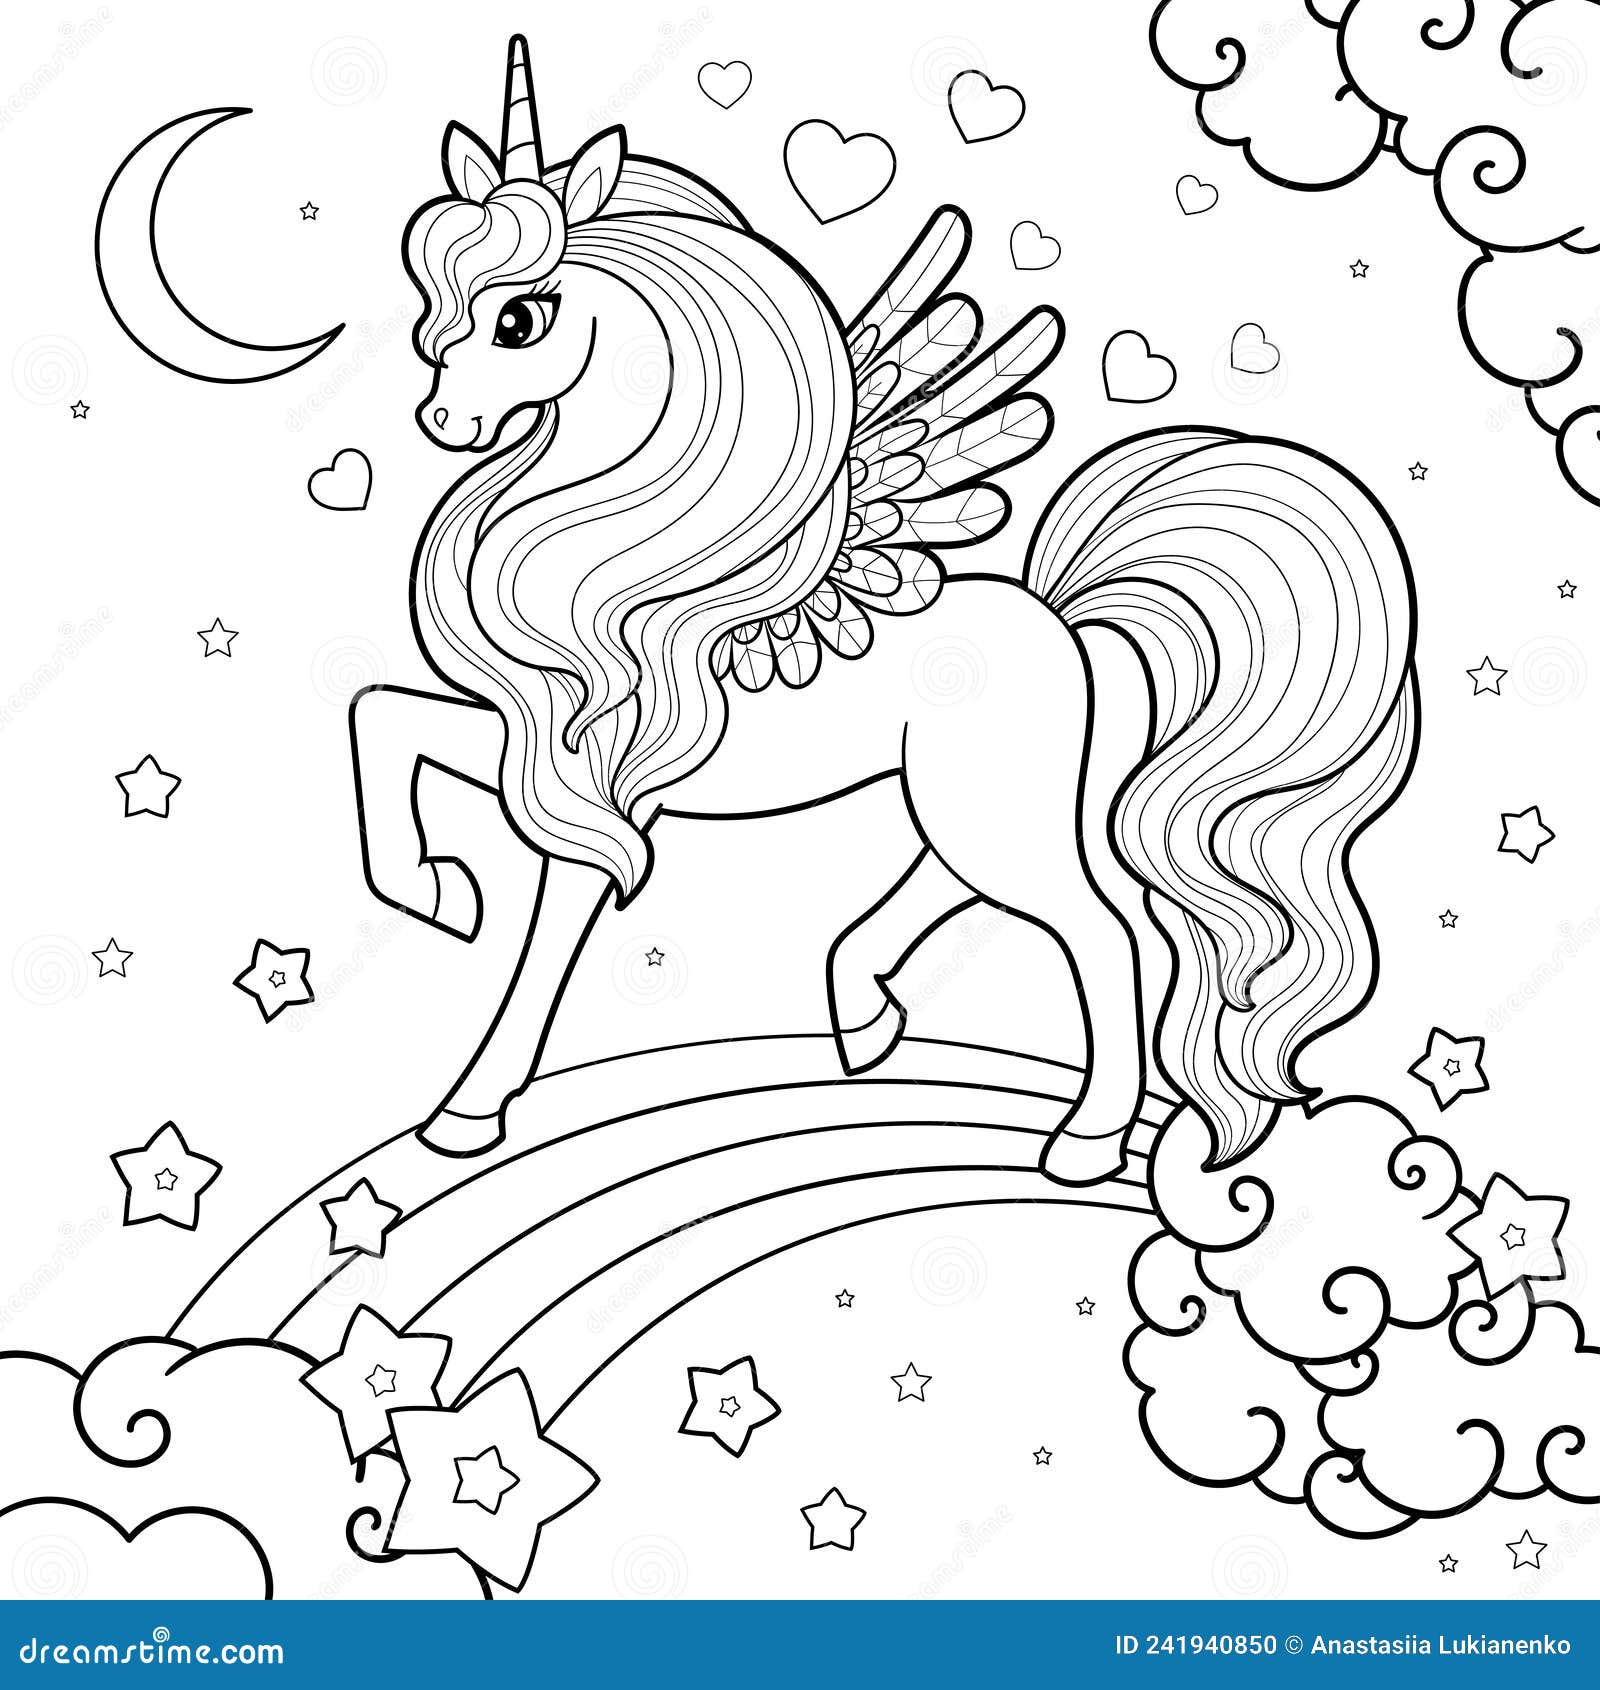 Rainbow Unicorn png images | PNGWing-saigonsouth.com.vn